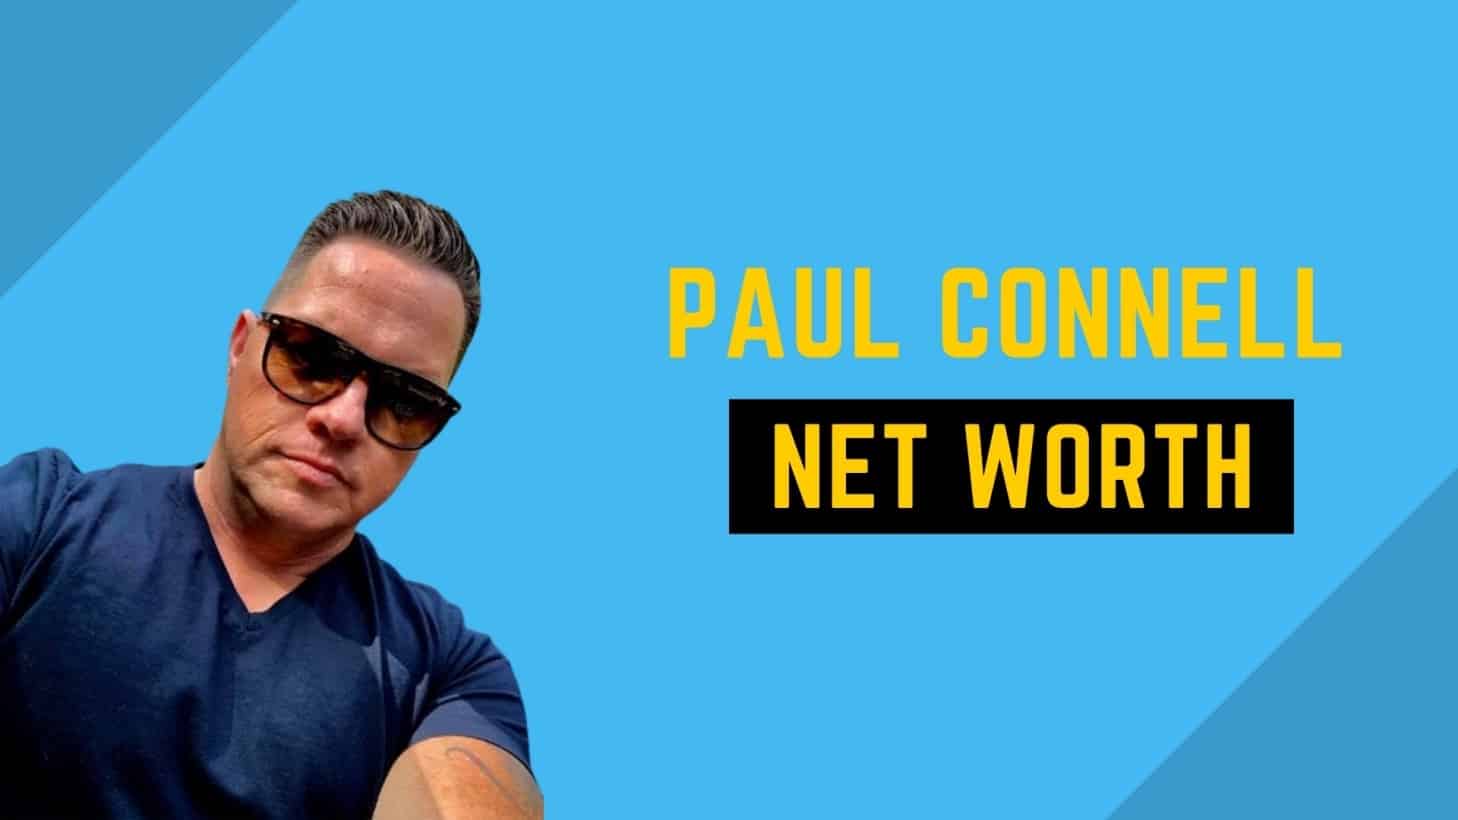 Paul Connell Net worth 2022: Know Dolores Catania’s New Boyfriend Paul Connell Net Worth